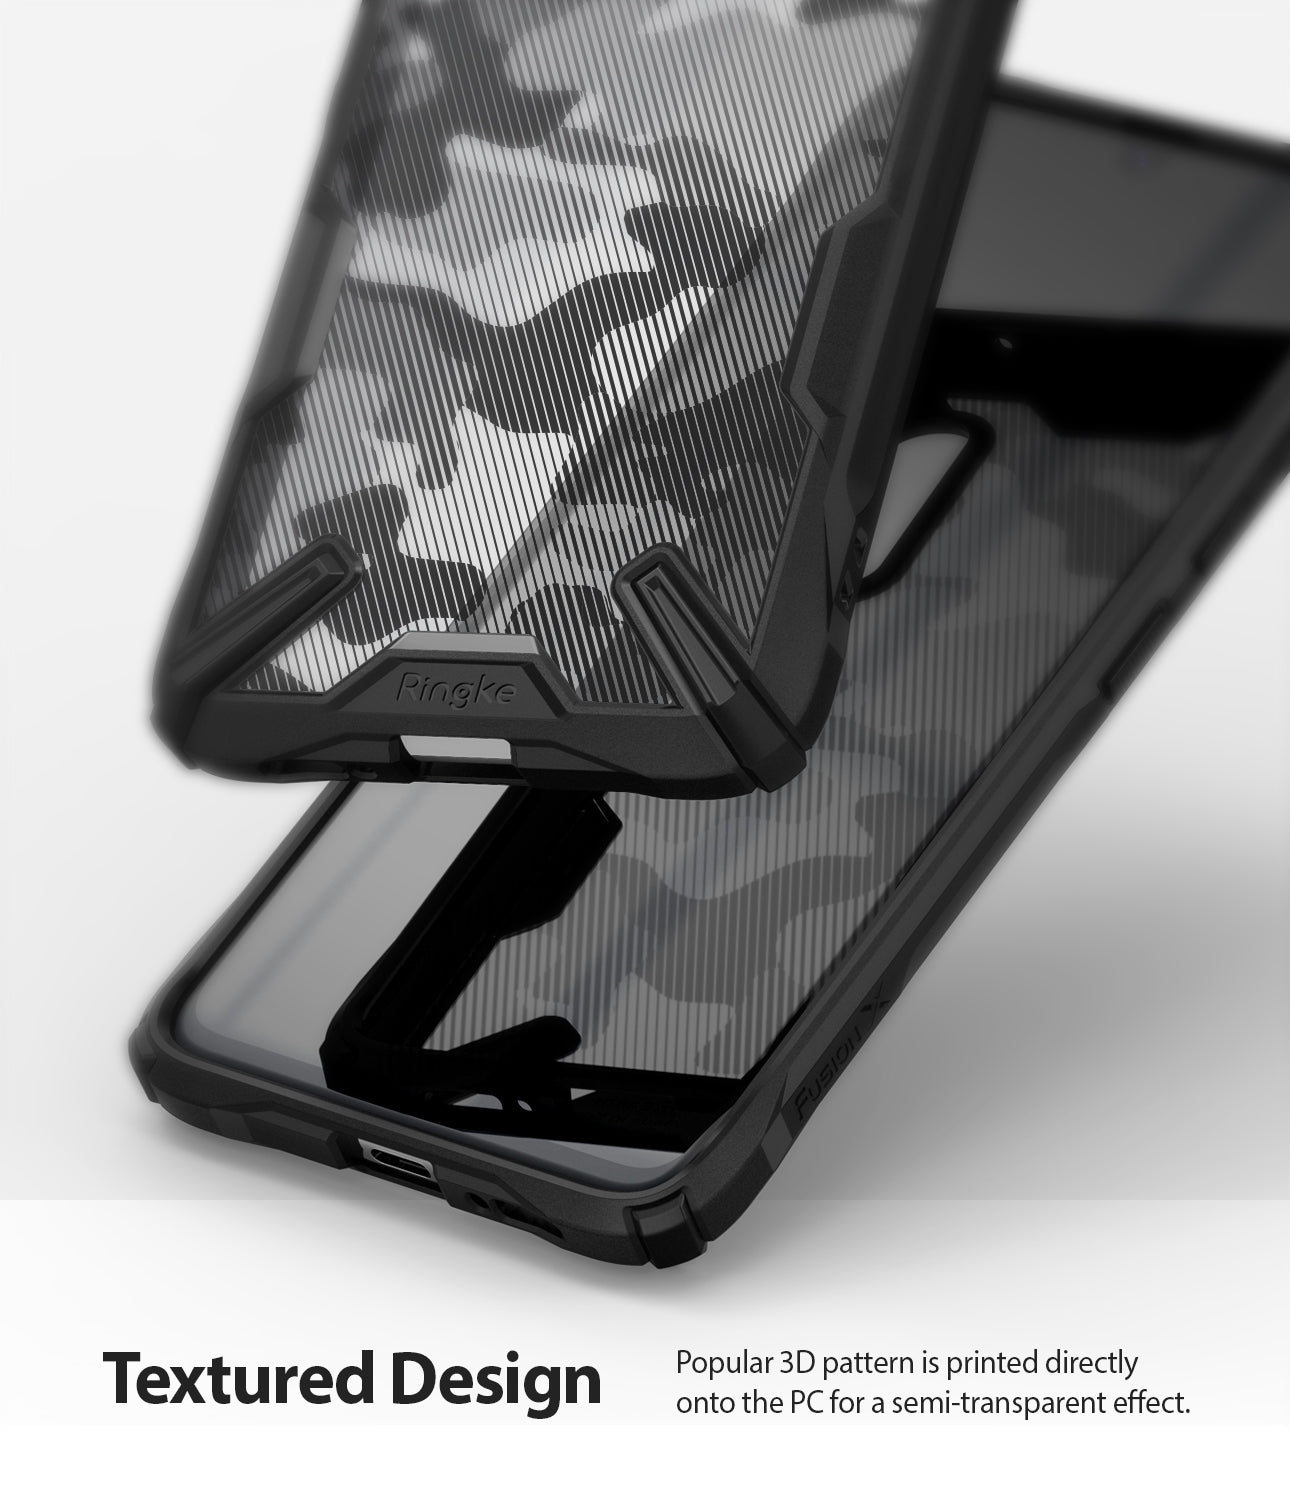 popular 3d camo pattern printed directly onto the pc for a semi transparent effect